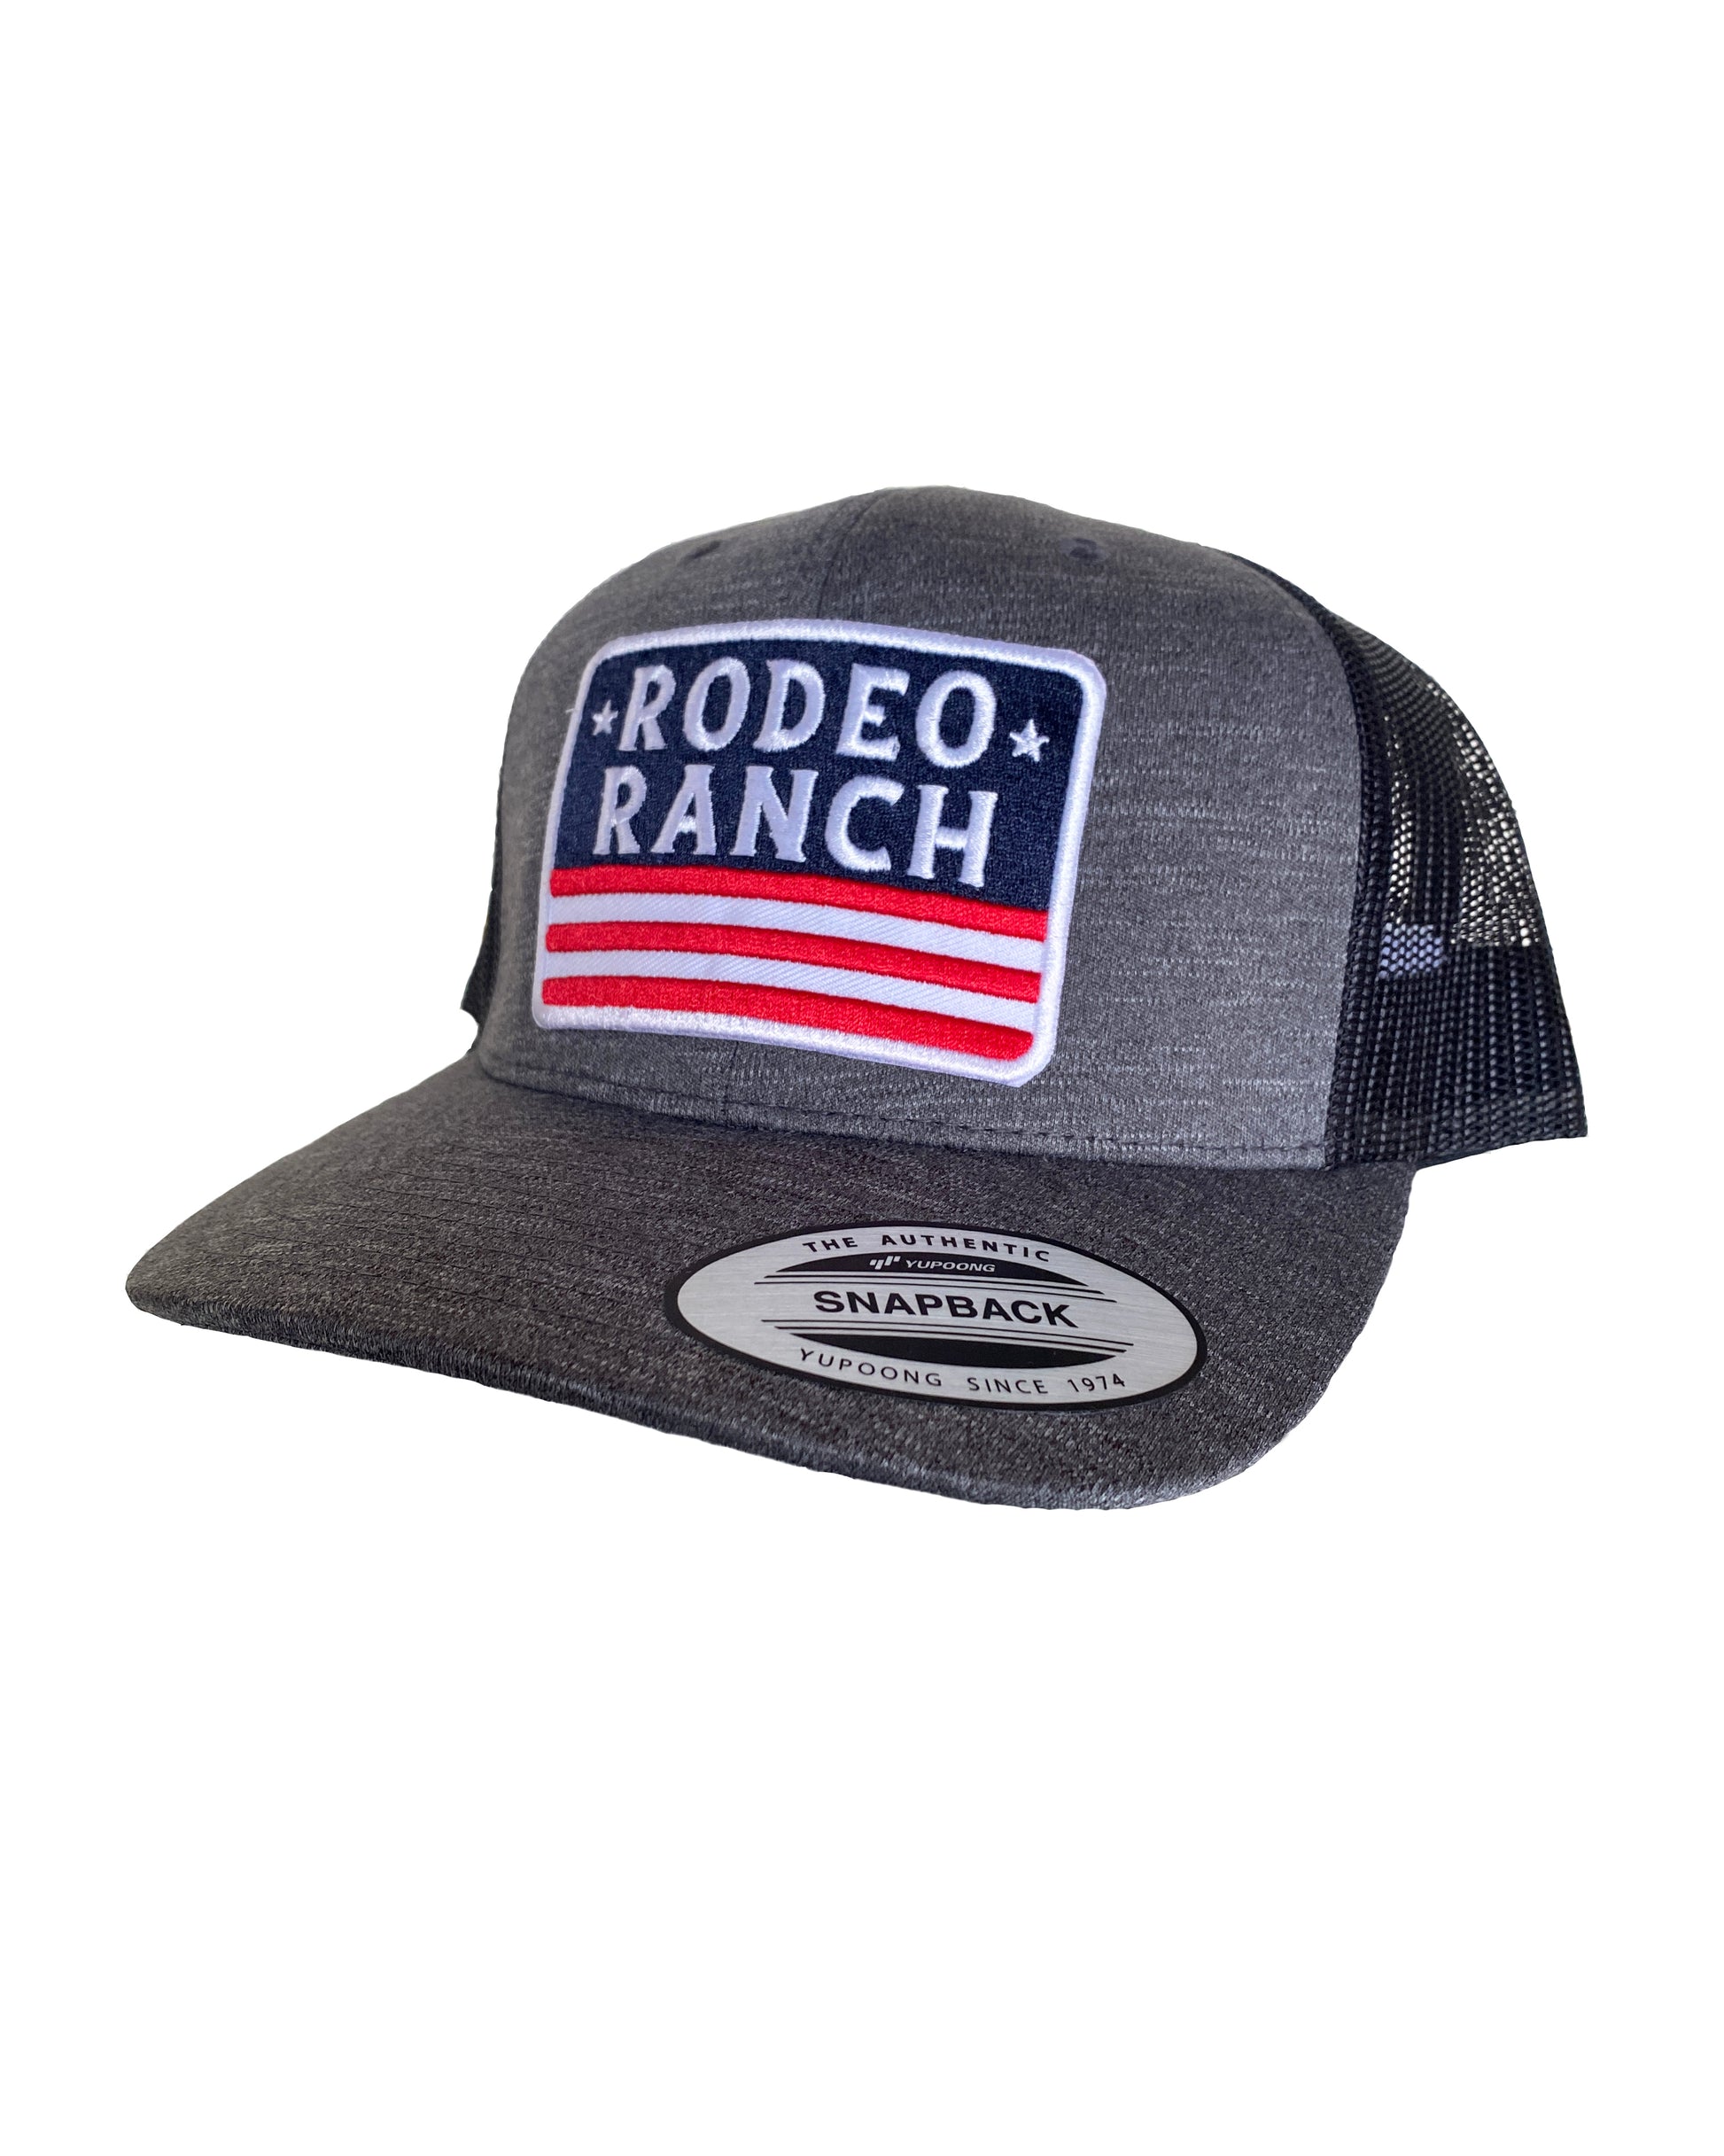 Rodeo Ranch Flag Hat - Heather charcoal and black – Rodeo Ranch Wholesale